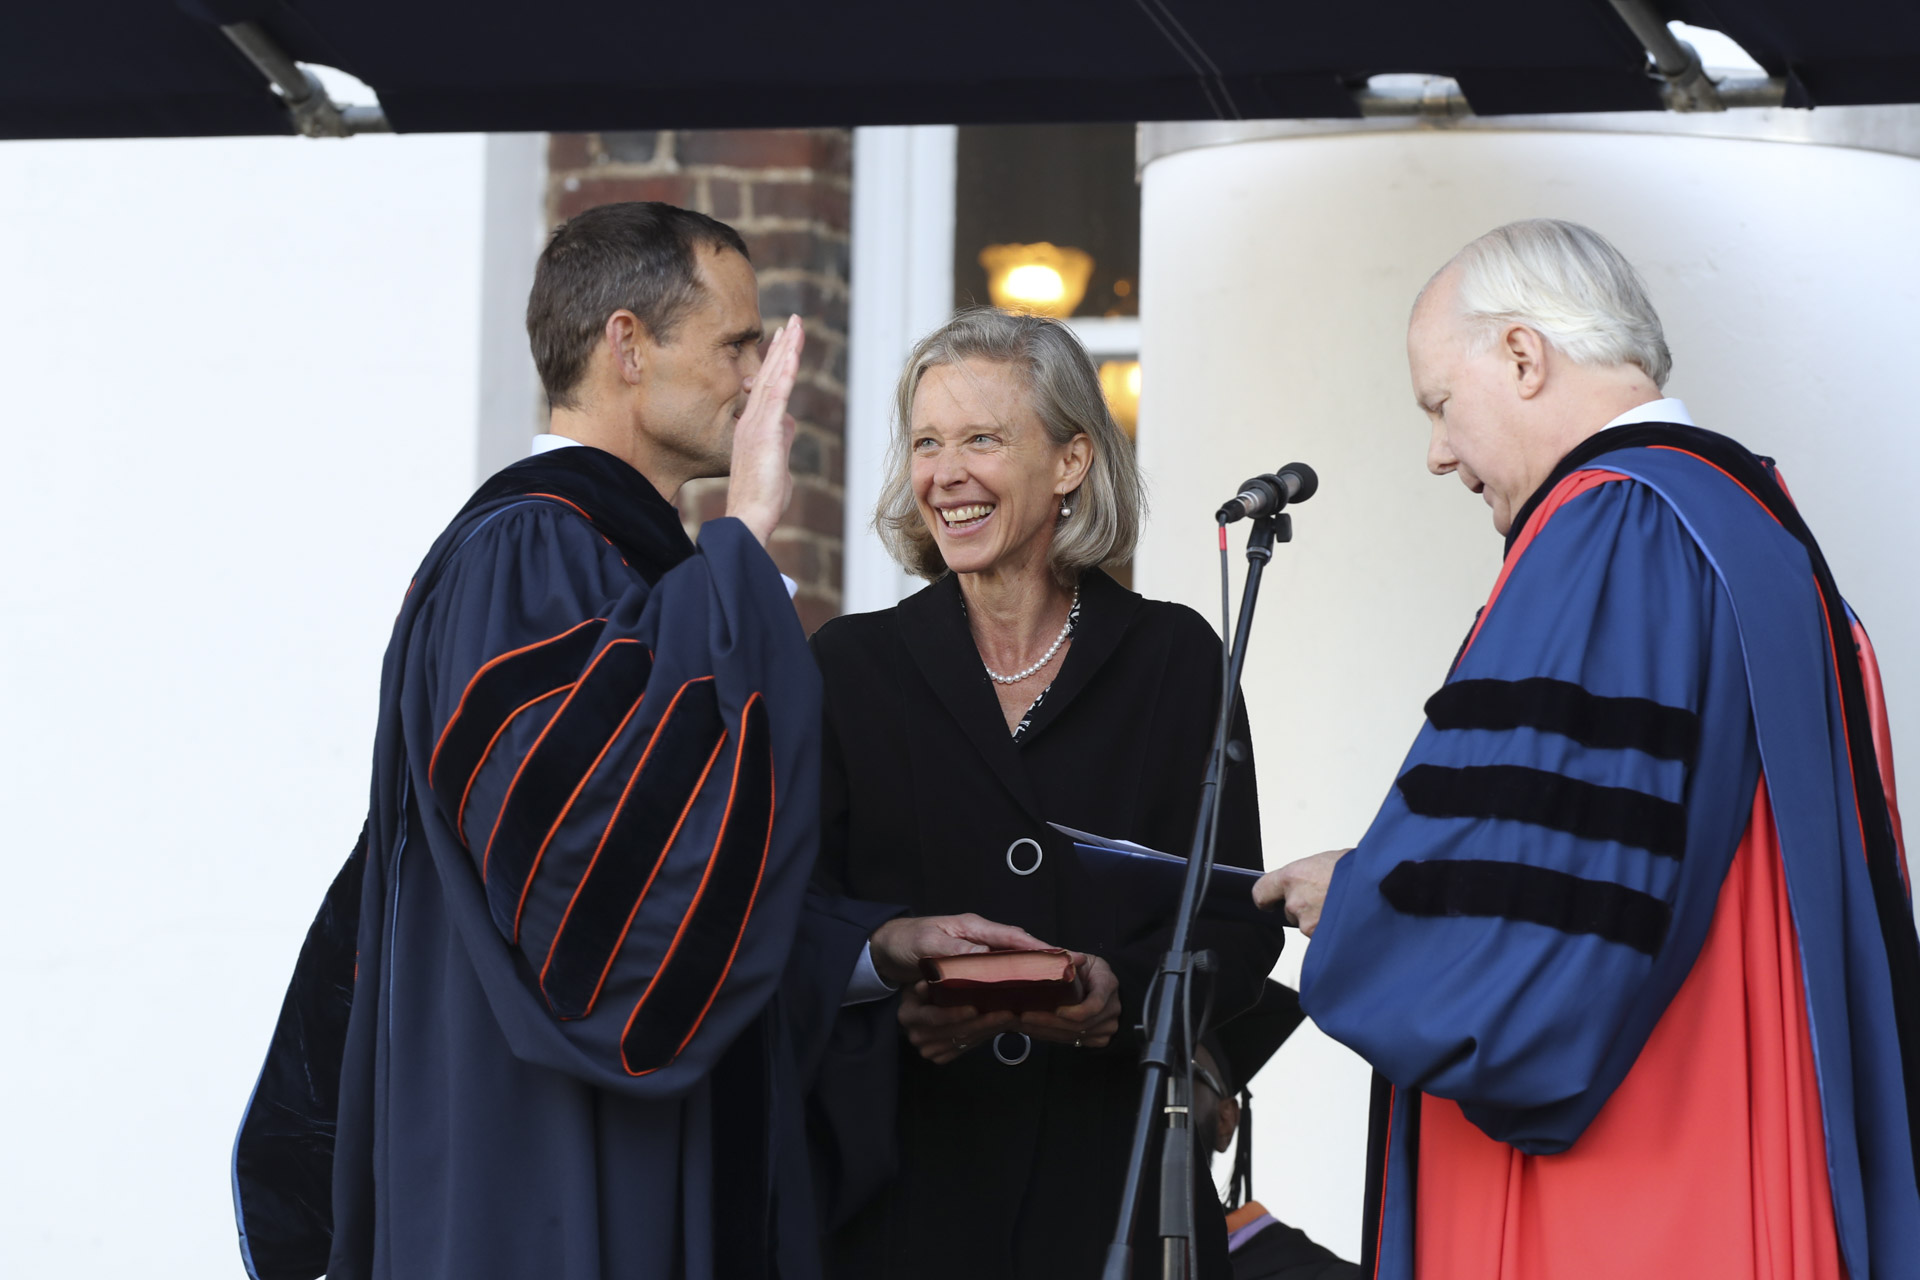 President Jim Ryan takes an Oath with wife Katie holding a bible